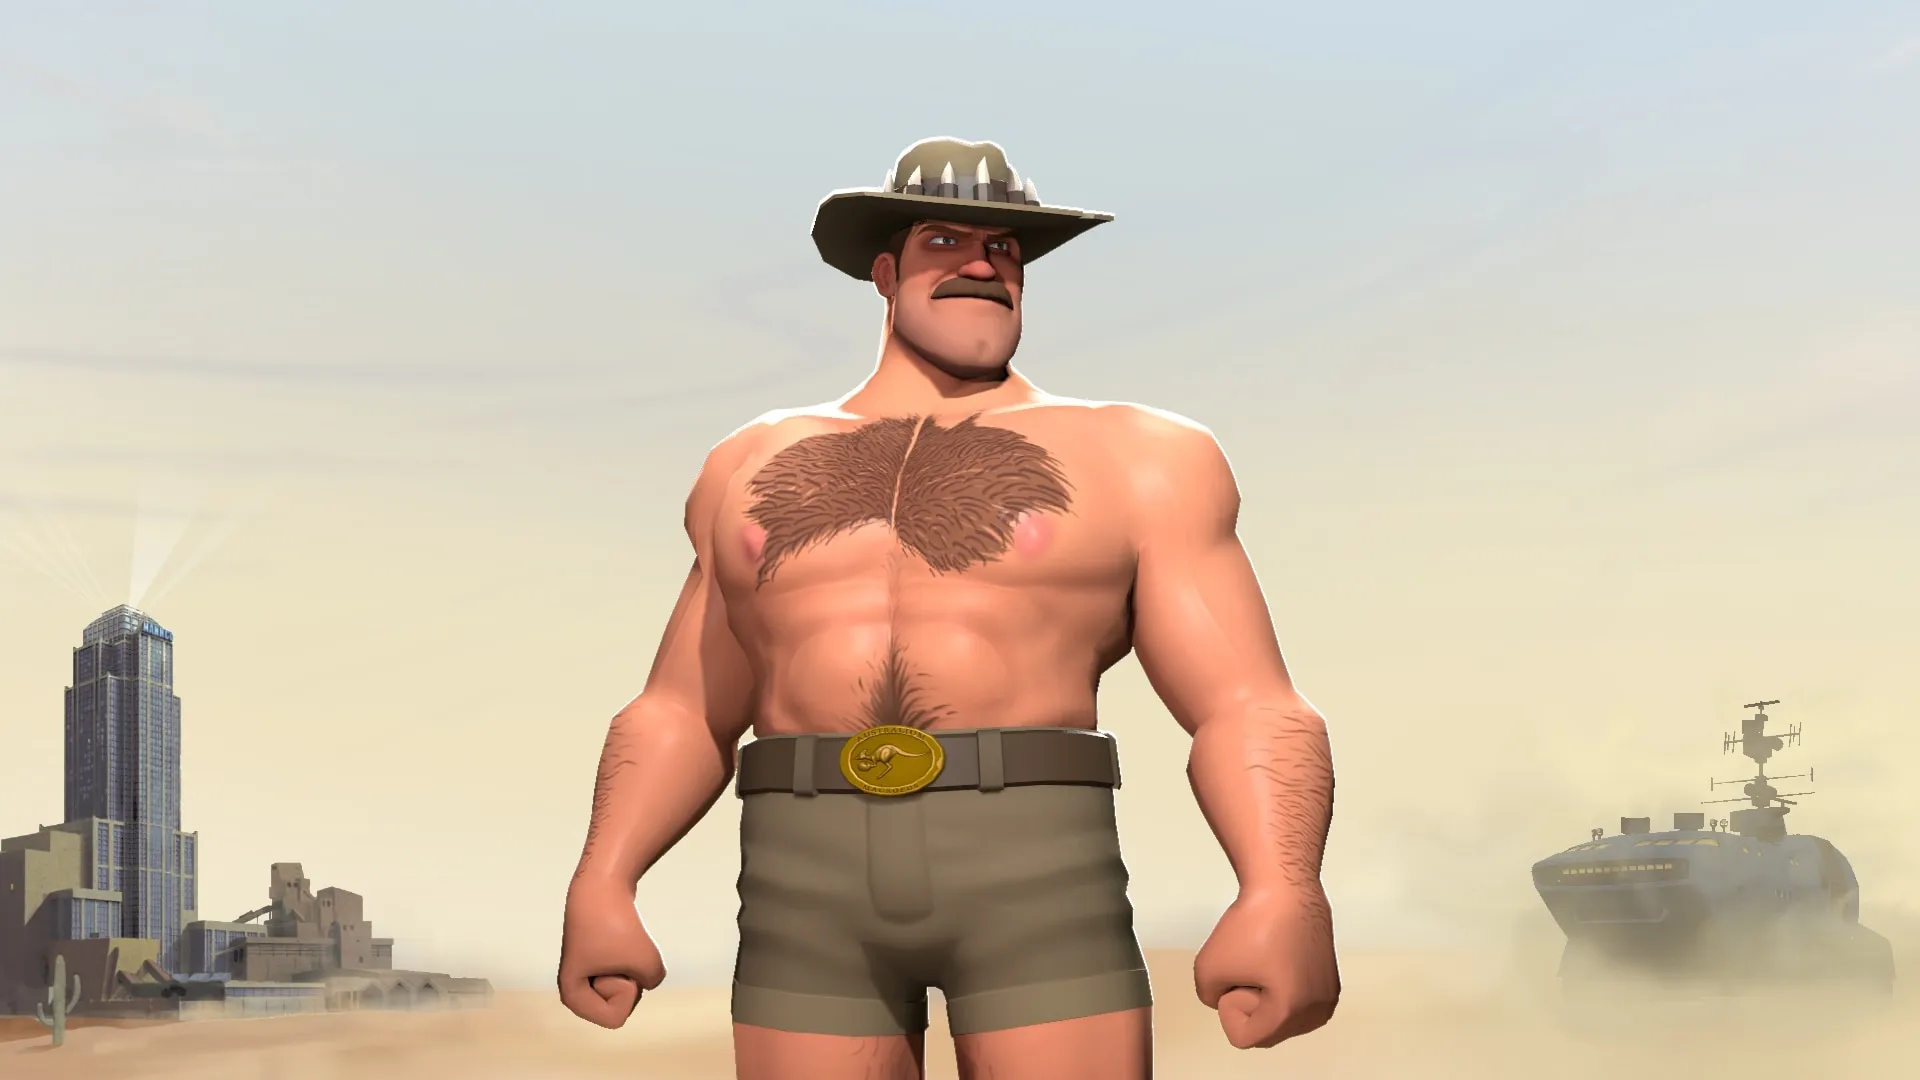 Saxton Hale from Team Fortress 2